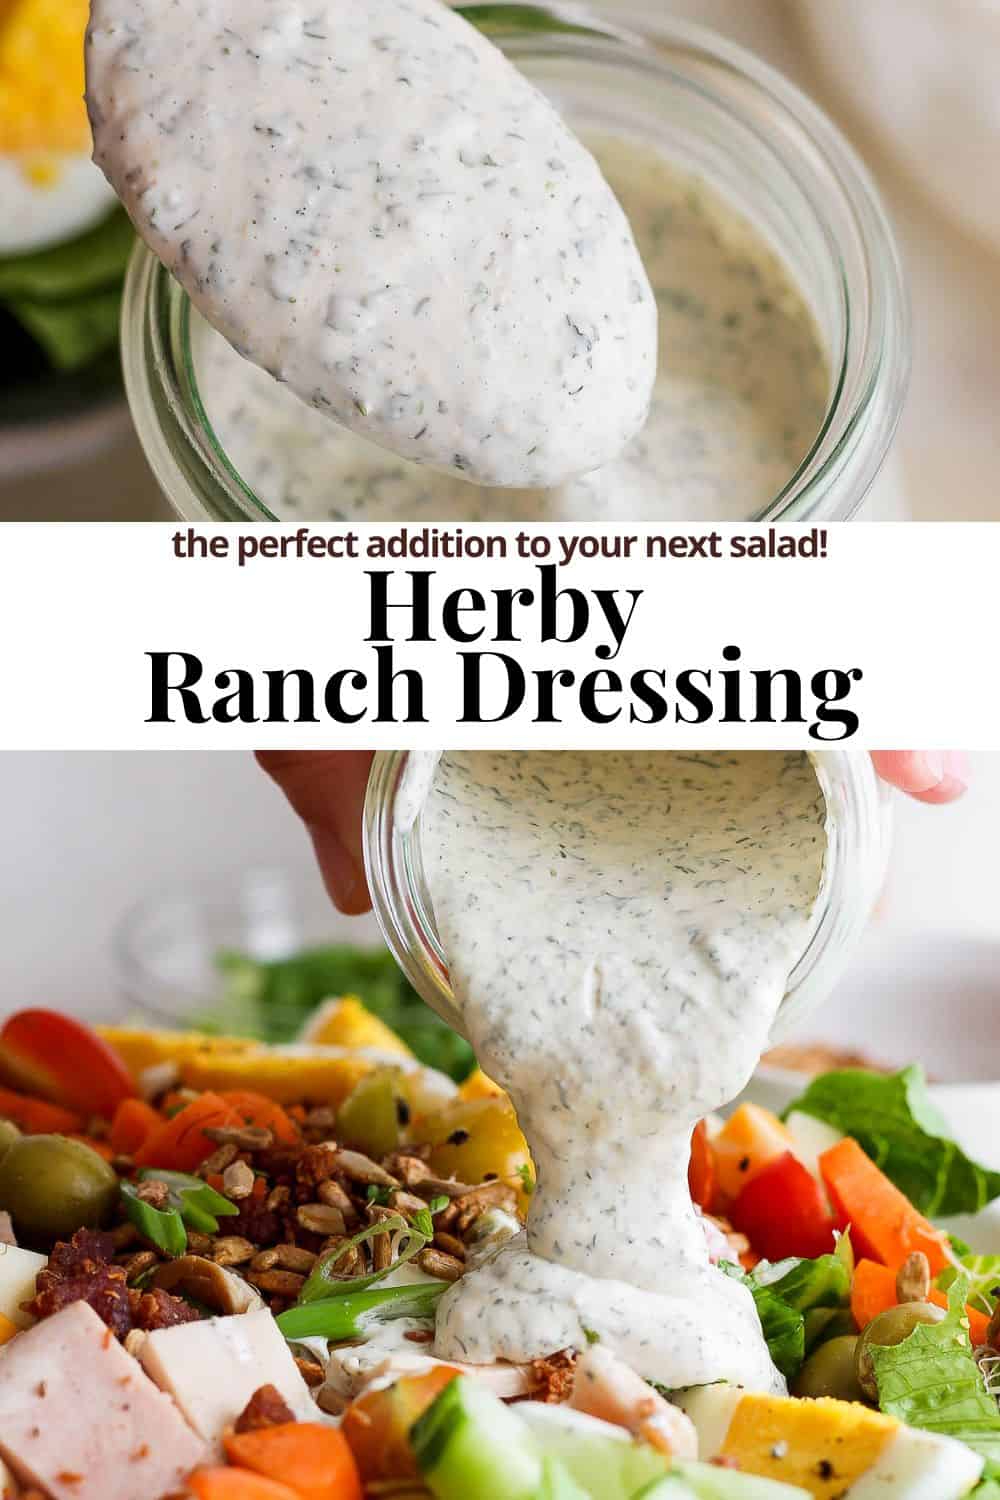 Pinterest image showing ranch dressing with the title, "Herby ranch dressing. the perfect addition to your next salad."